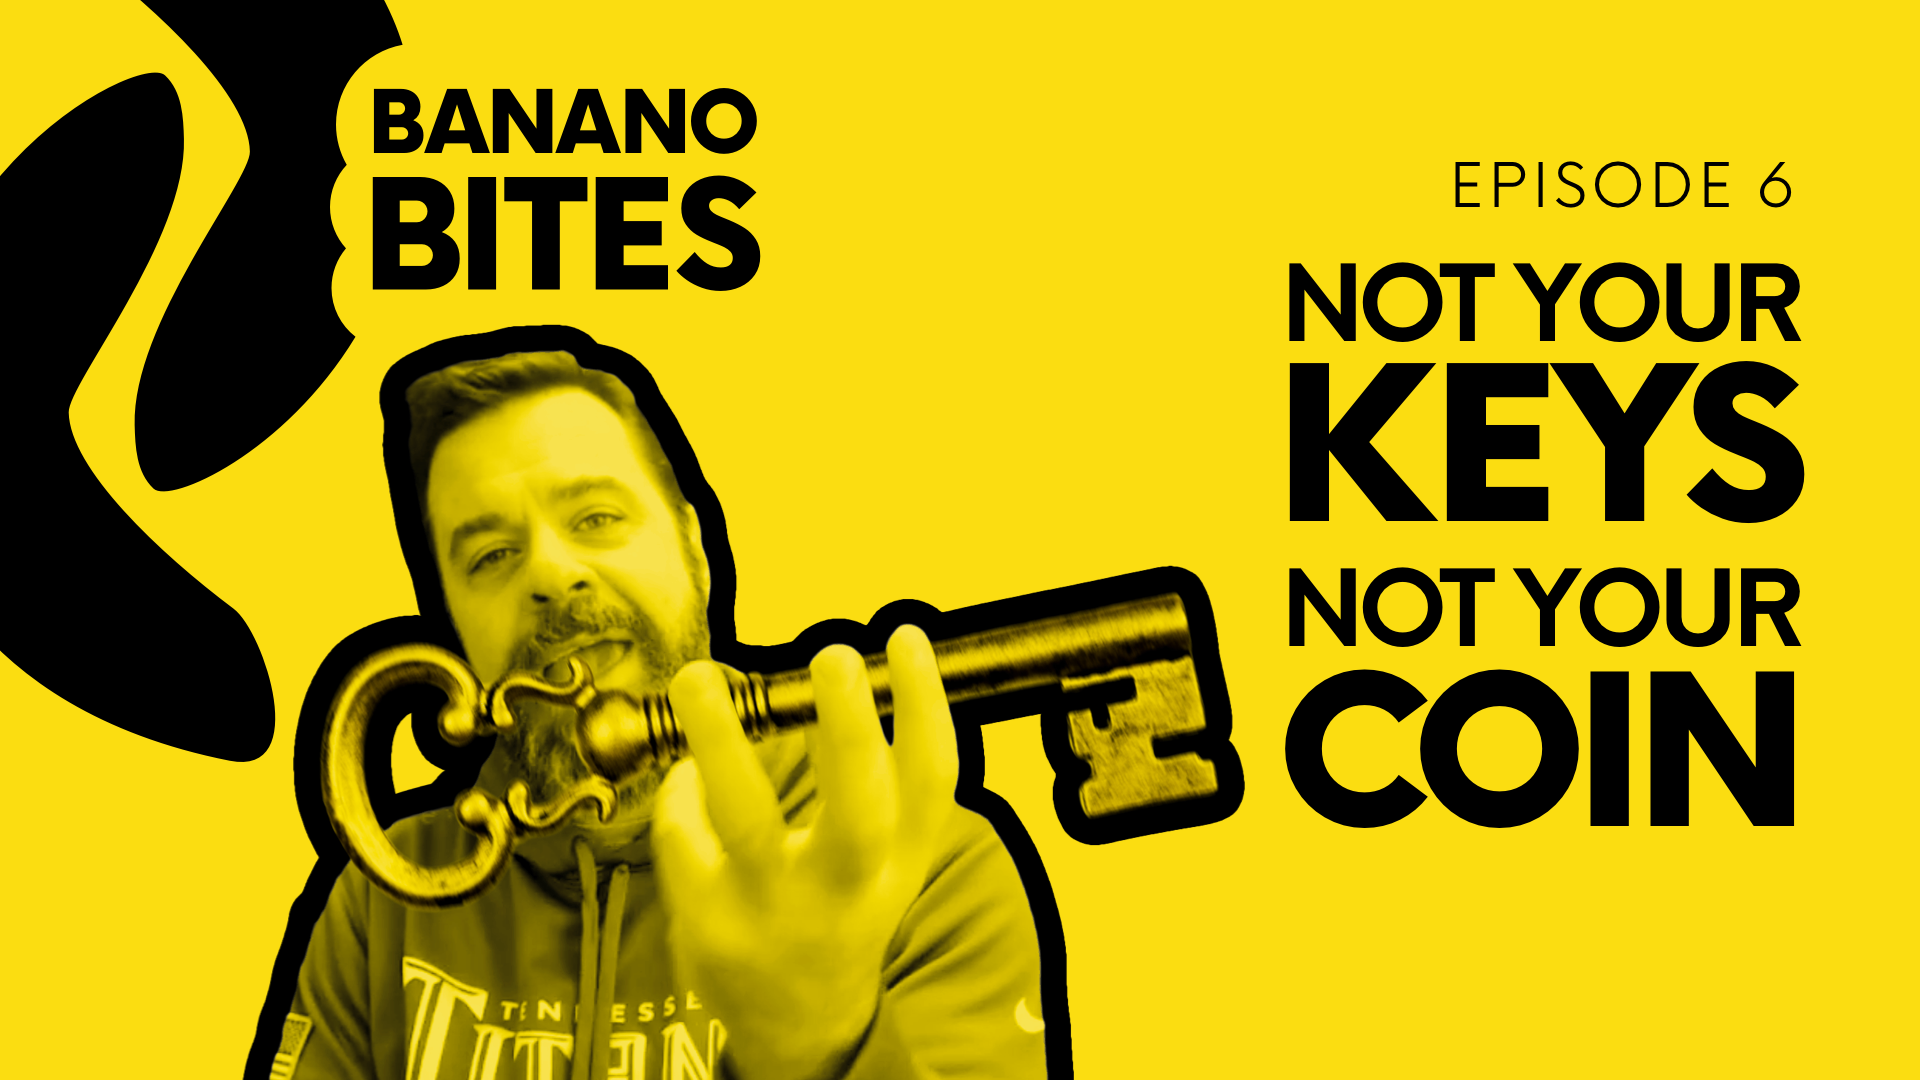 ‘Banano Bites’ Episode 6: Not Your Keys, Not Your Coin!